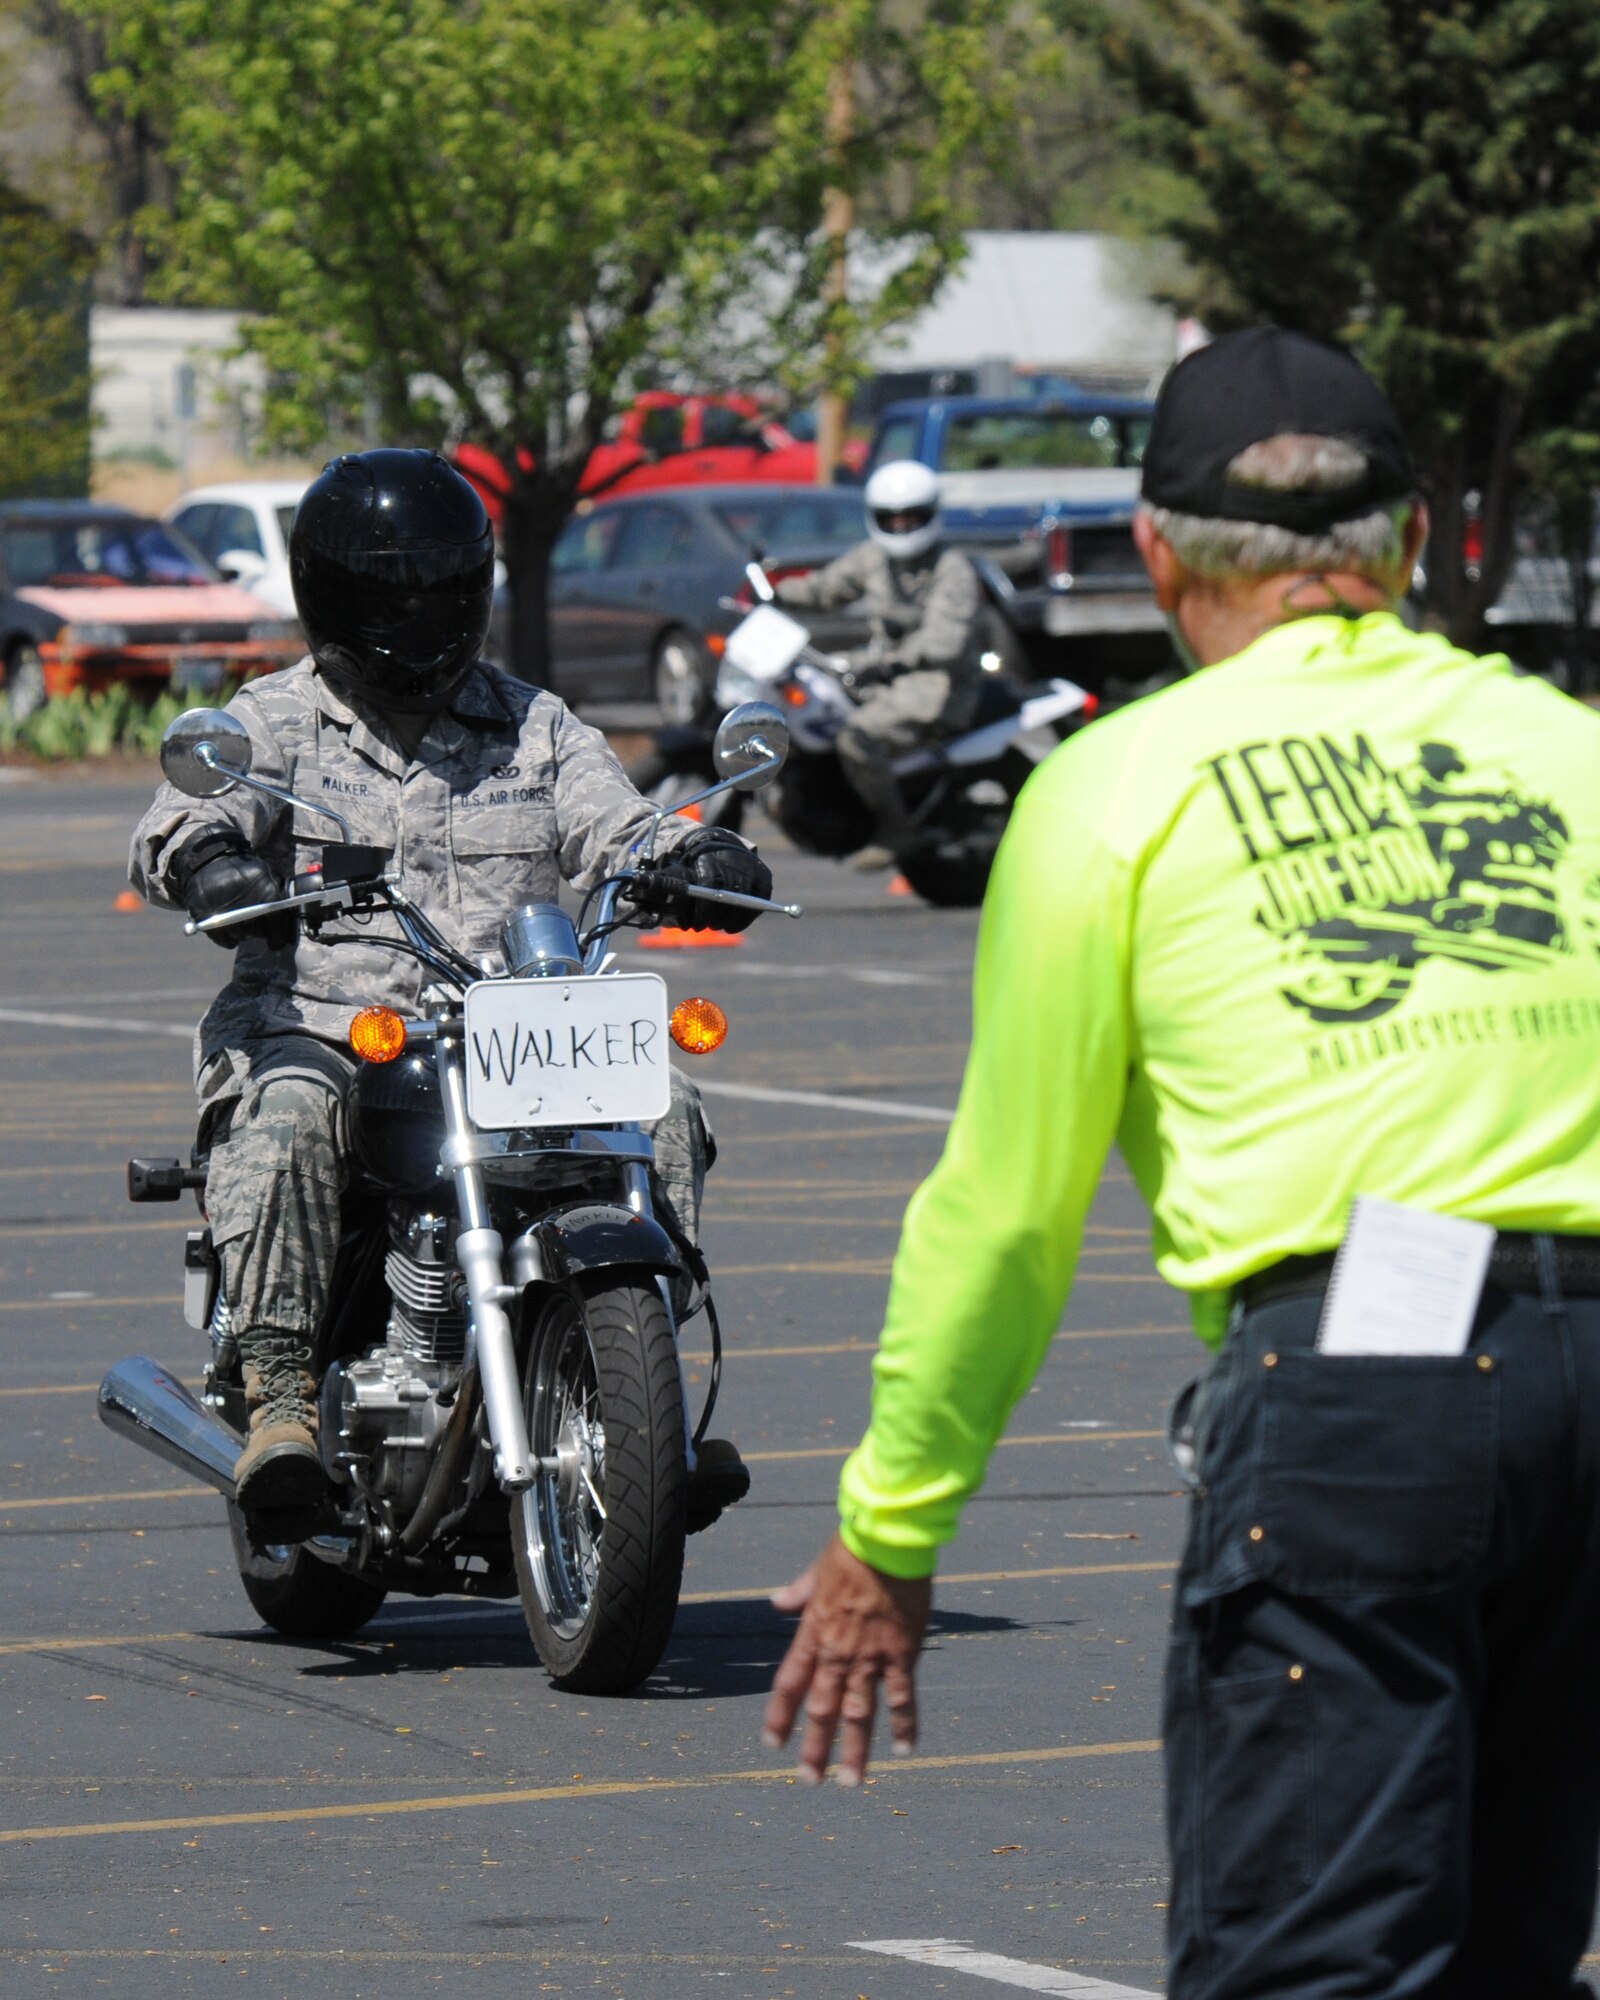 Oregon Air National Guard Tech. Sgt. Carl Walker, 270th Air Traffic Control Squadron, receives instruction during an exercise at a "Rider Skills Practice" course offered by Team Oregon at Klamath Falls, Ore., May 2, 2015. Team Oregon's RSP course provides motorcyclists with additional training exercises that build critical crash-avoidance skills such as stopping quickly, swerving effectively, and cornering skillfully. (U.S. Air National Guard photo by Senior Airman Penny Snoozy/Released)